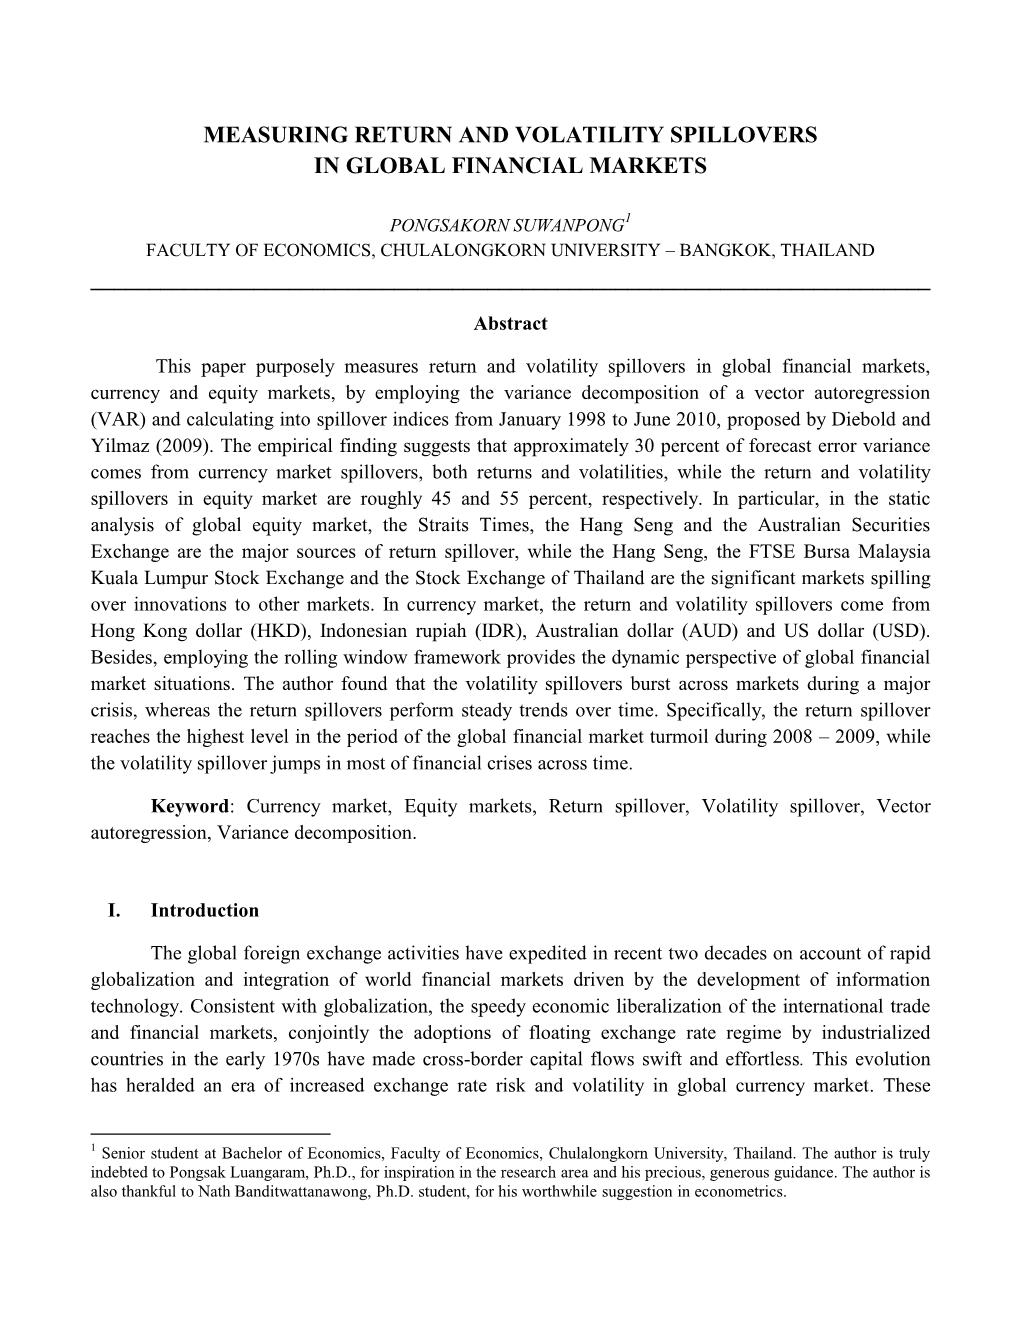 Measuring Return and Volatility Spillovers in Global Financial Markets